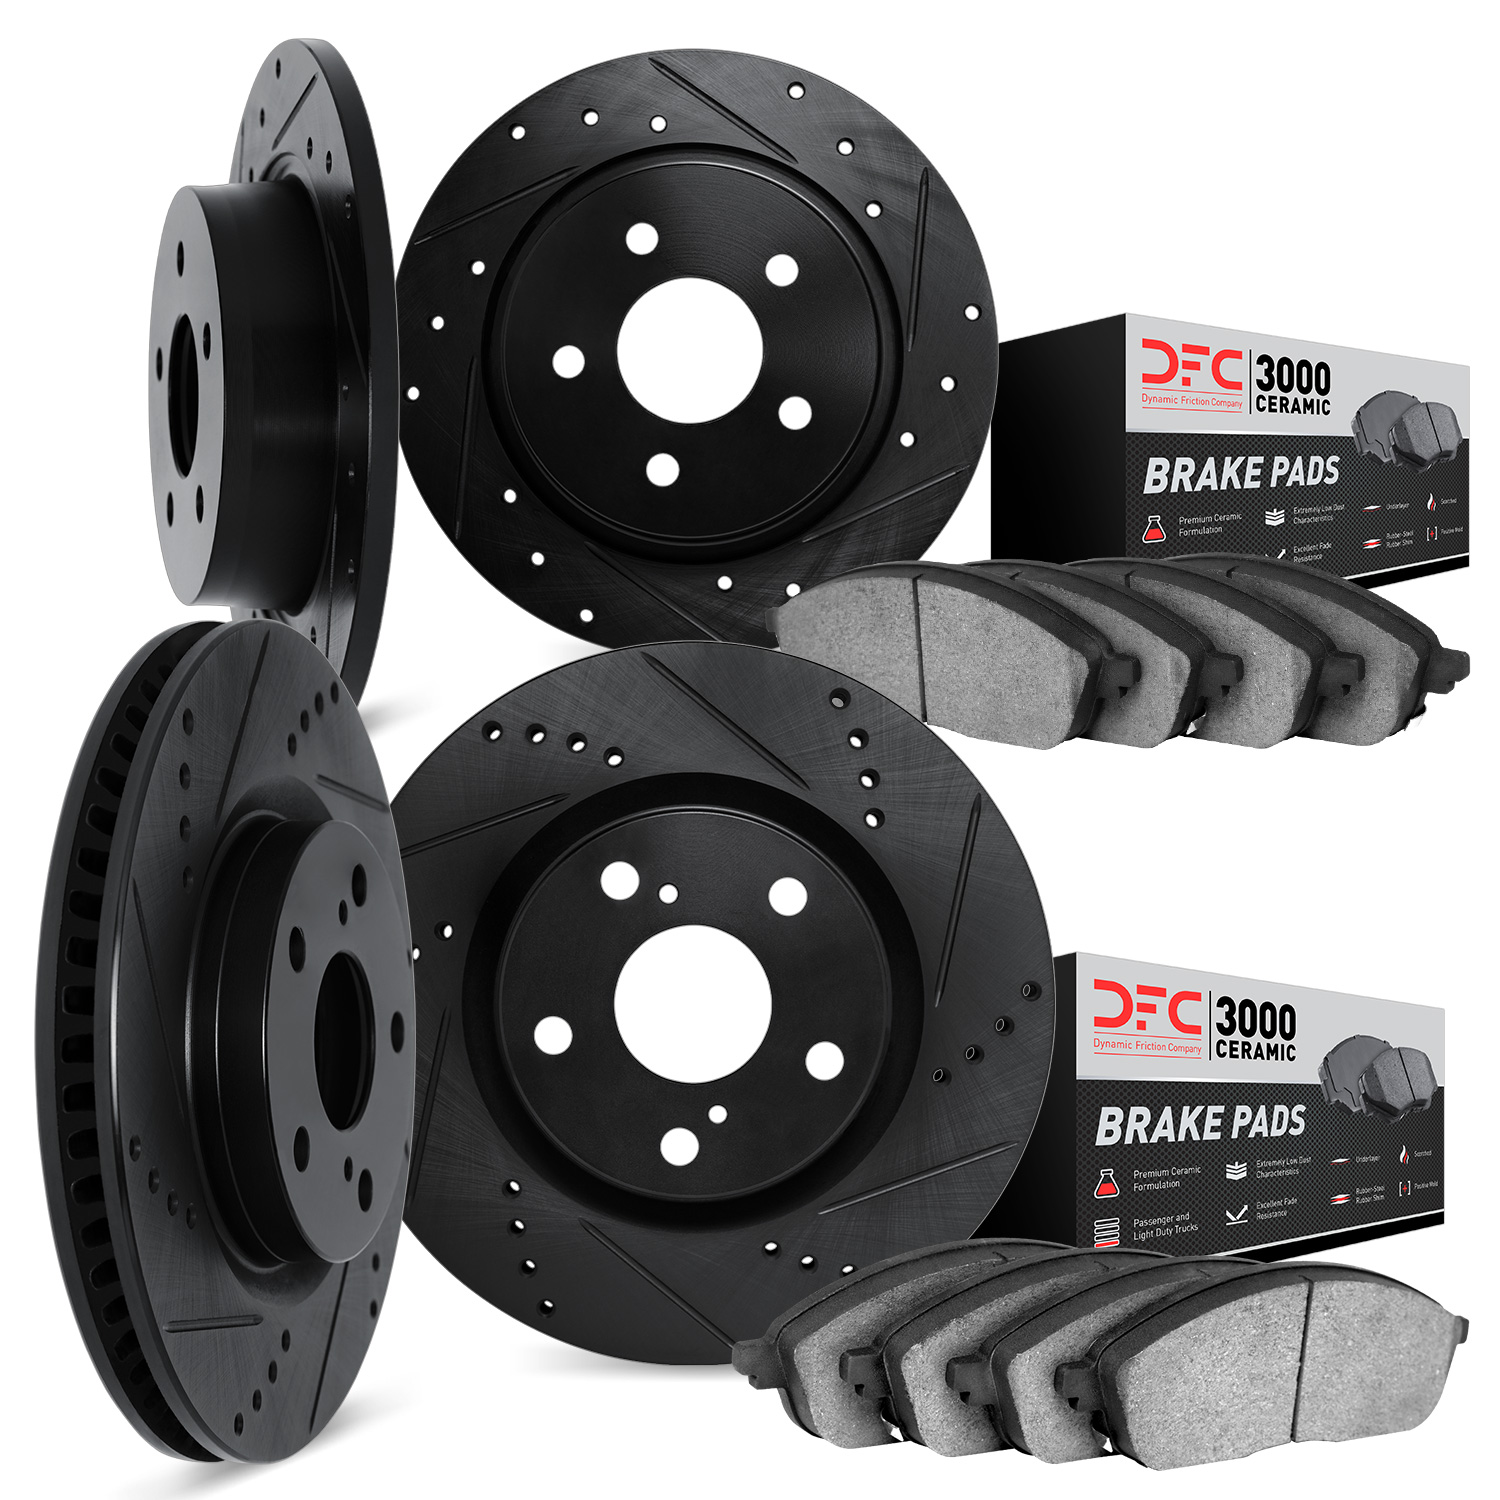 8304-39024 Drilled/Slotted Brake Rotors with 3000-Series Ceramic Brake Pads Kit [Black], 2013-2016 Mopar, Position: Front and Re